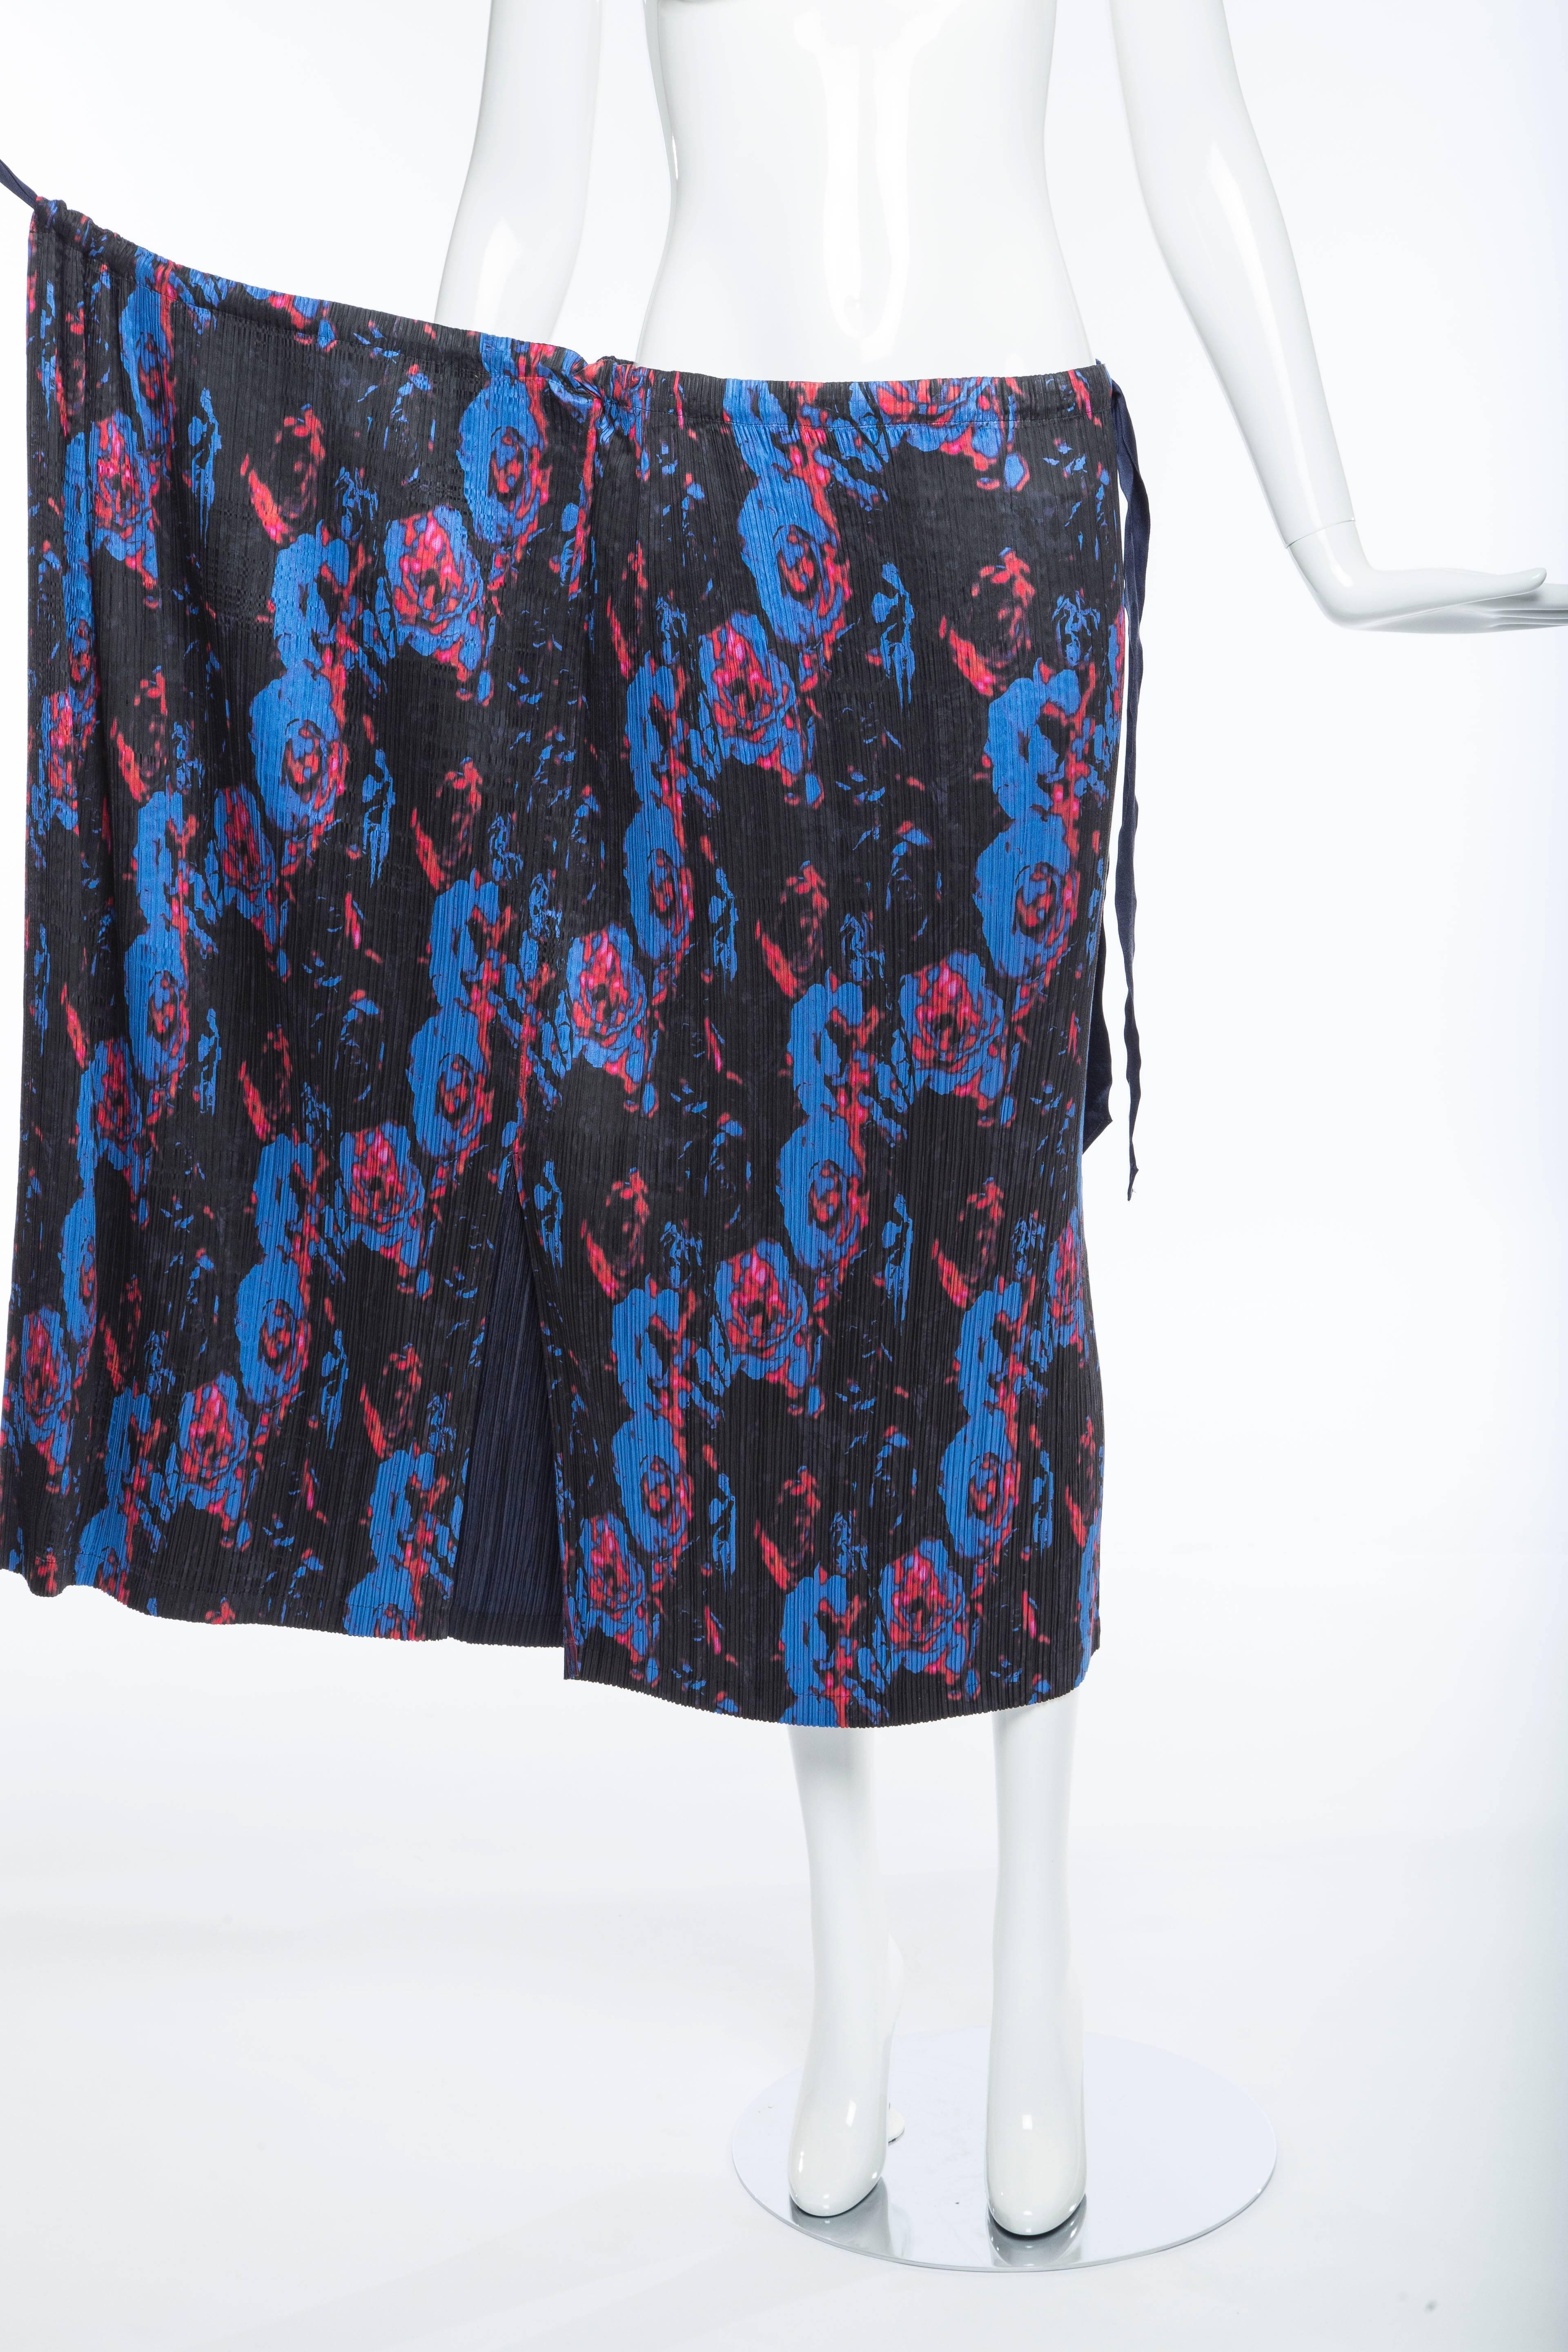 Issey Miyake Navy Blue Printed Silk Pleated Skirt,  Spring 2007 For Sale 2